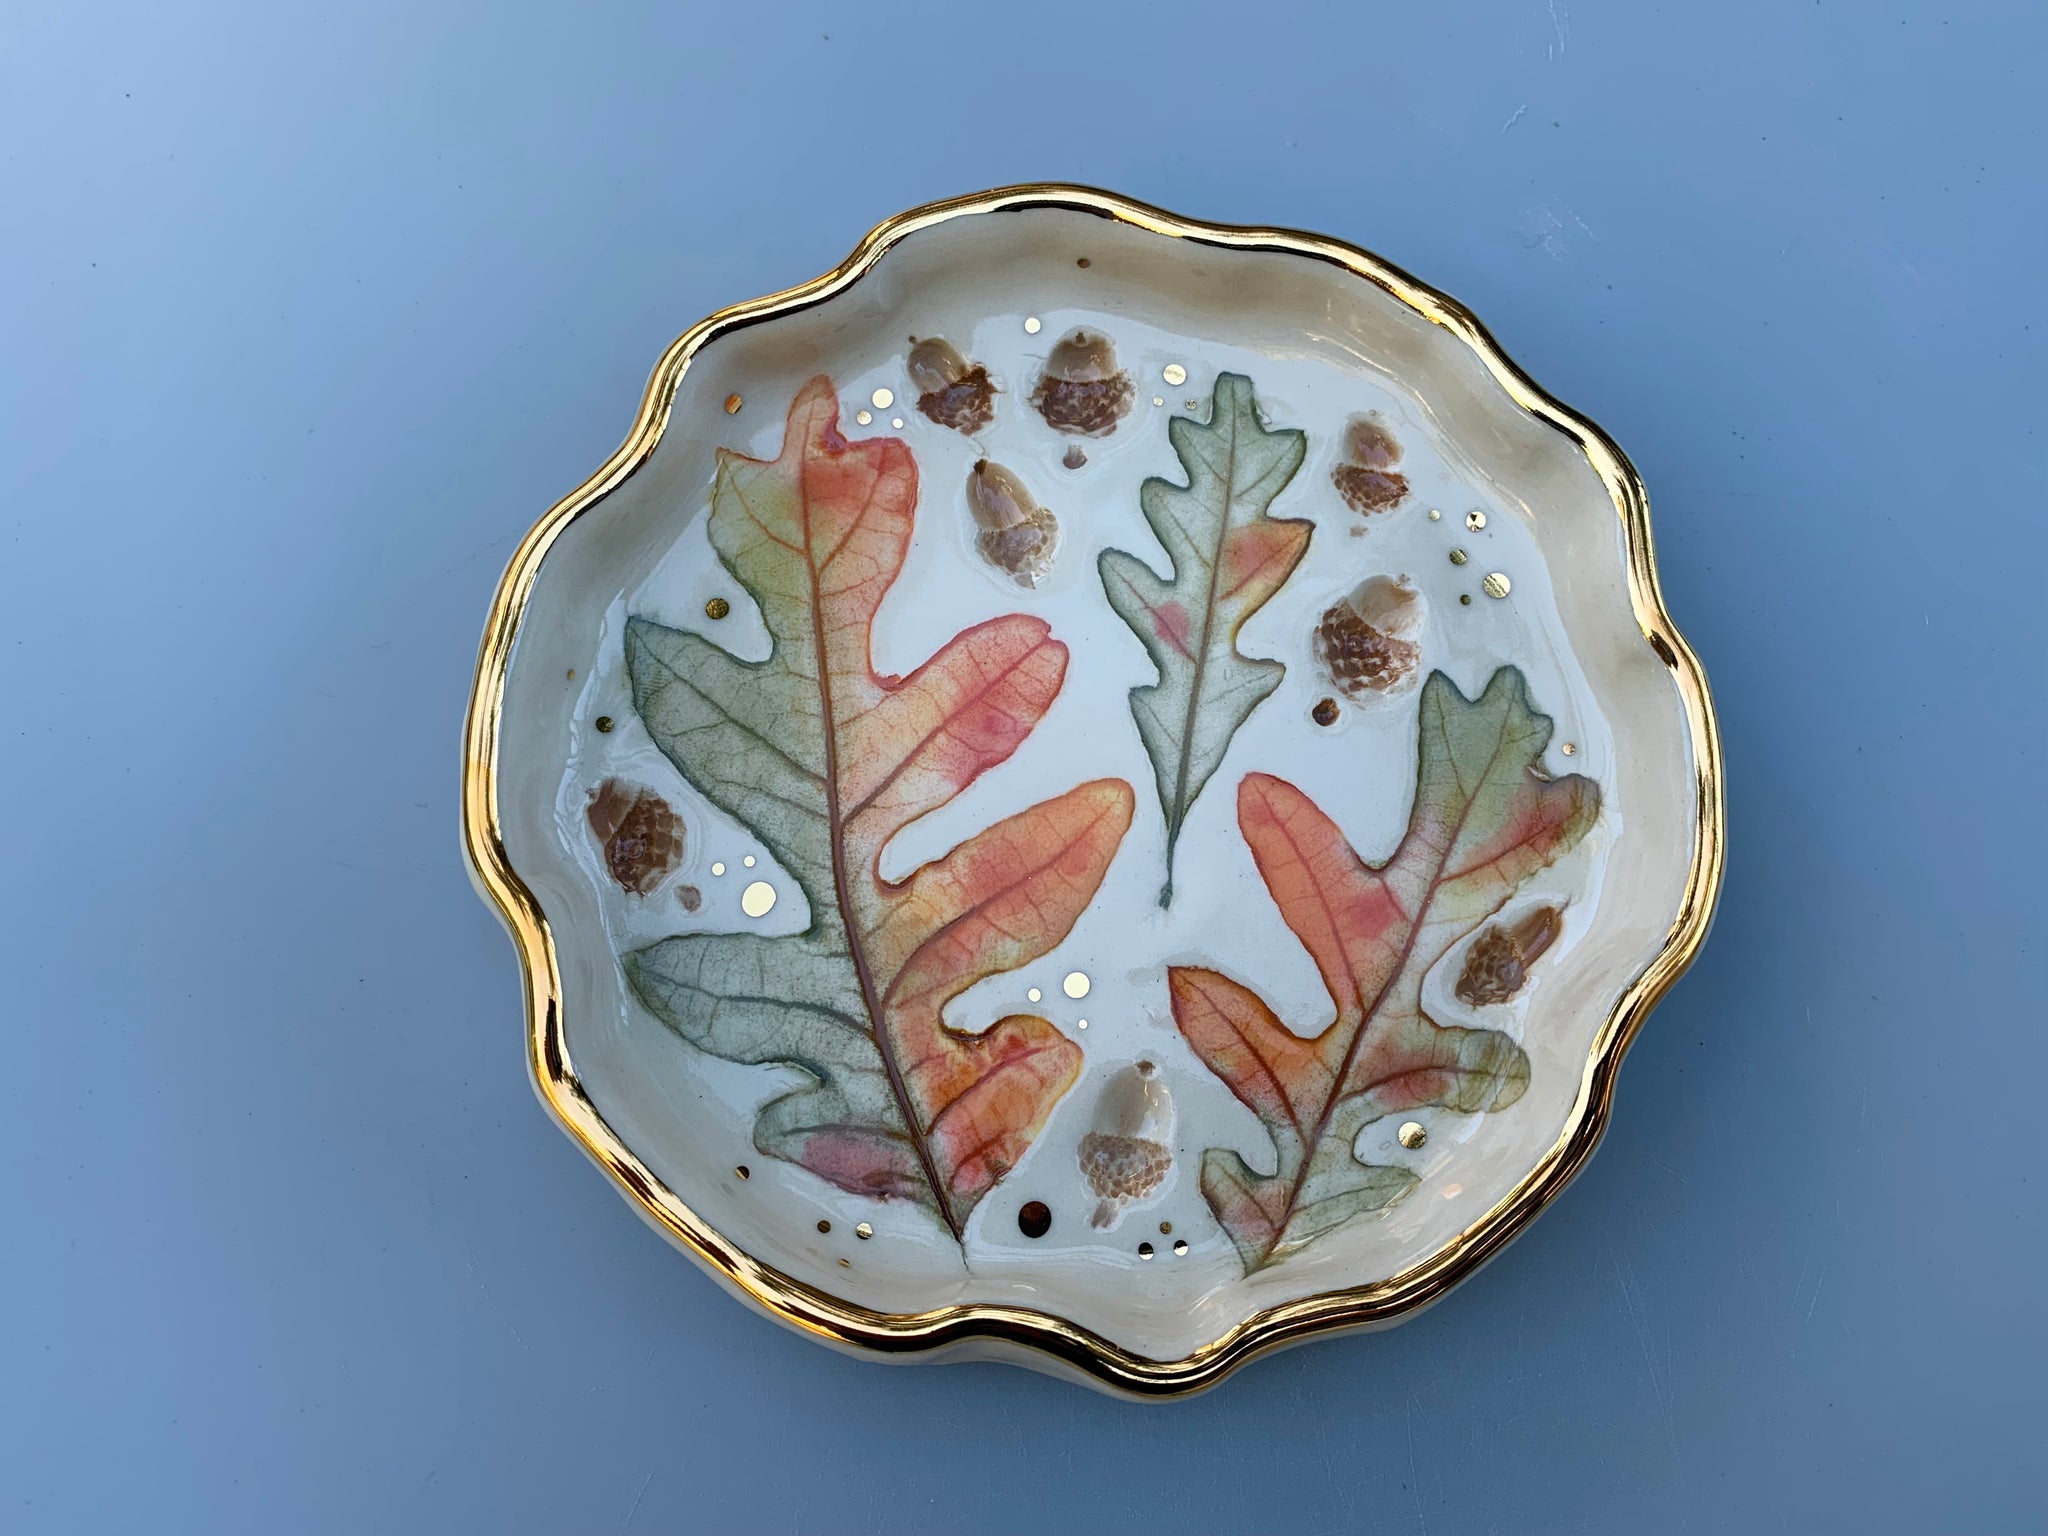 Oak Leaf and Acorn Ceramic Jewelry Dish, Colorful Fall Leaves with Gold Accent